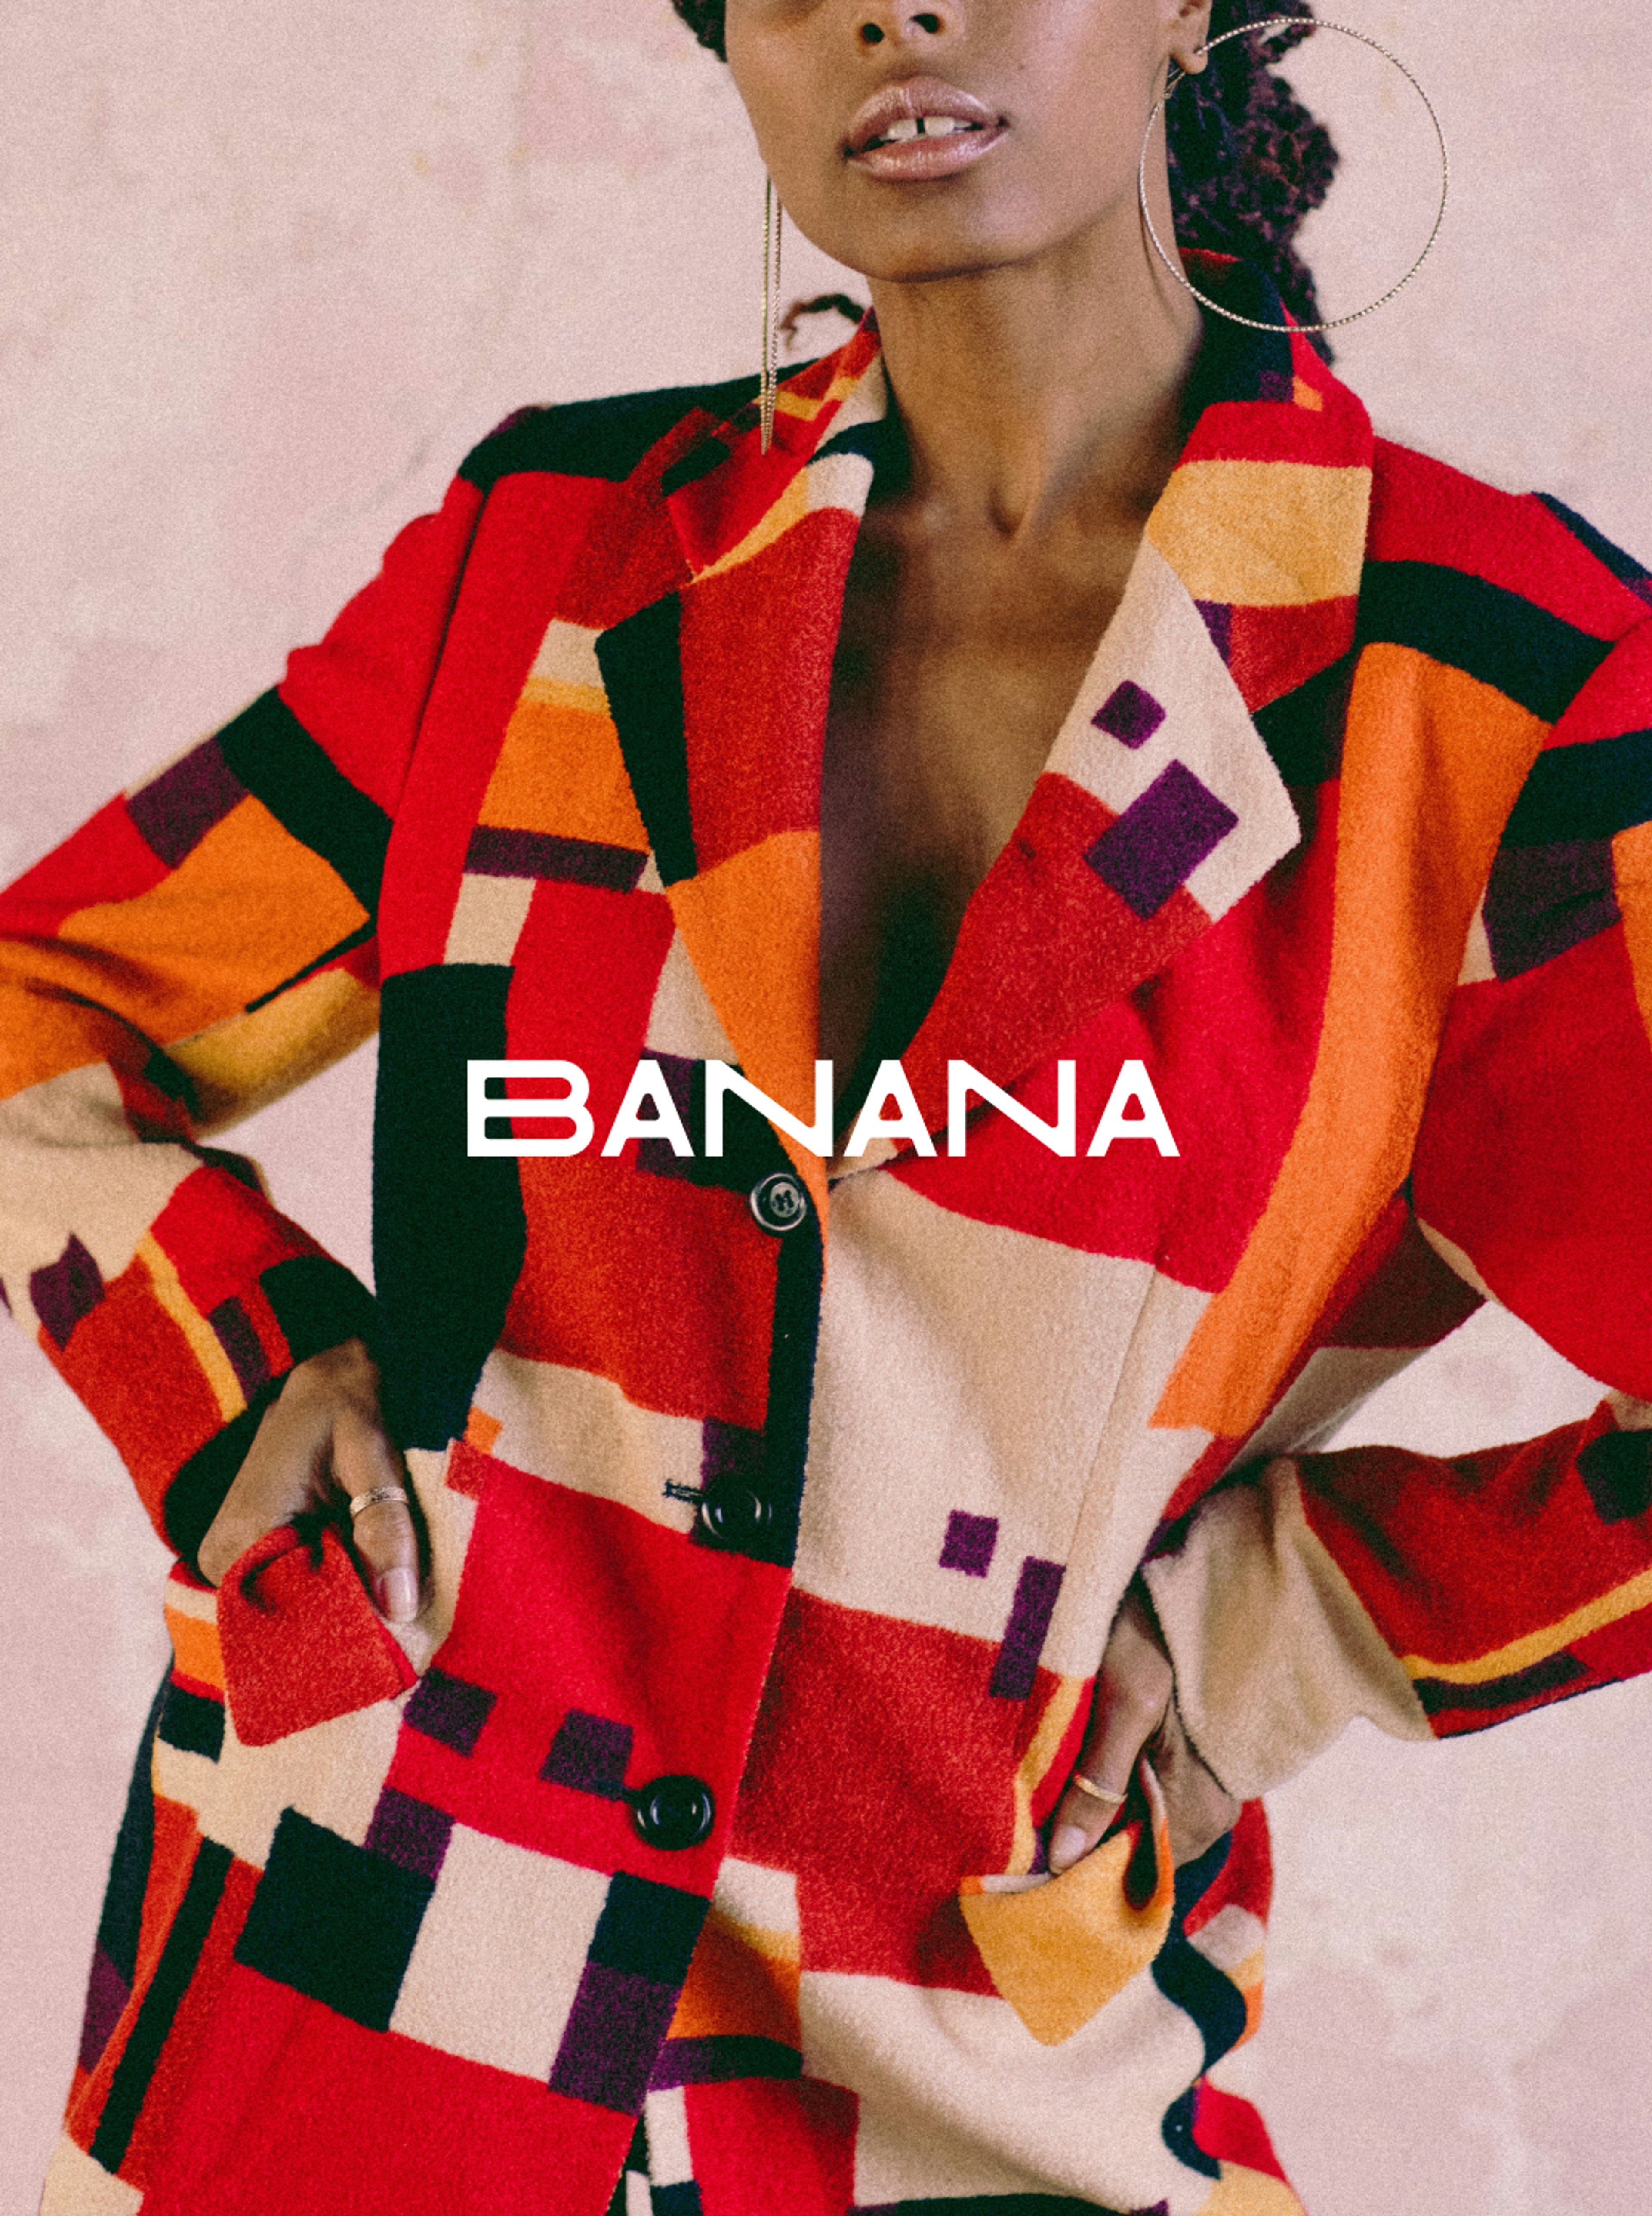 Woman wearing a brightly coloured patchwork jacket. "Banana" logo is centred on top of the image.